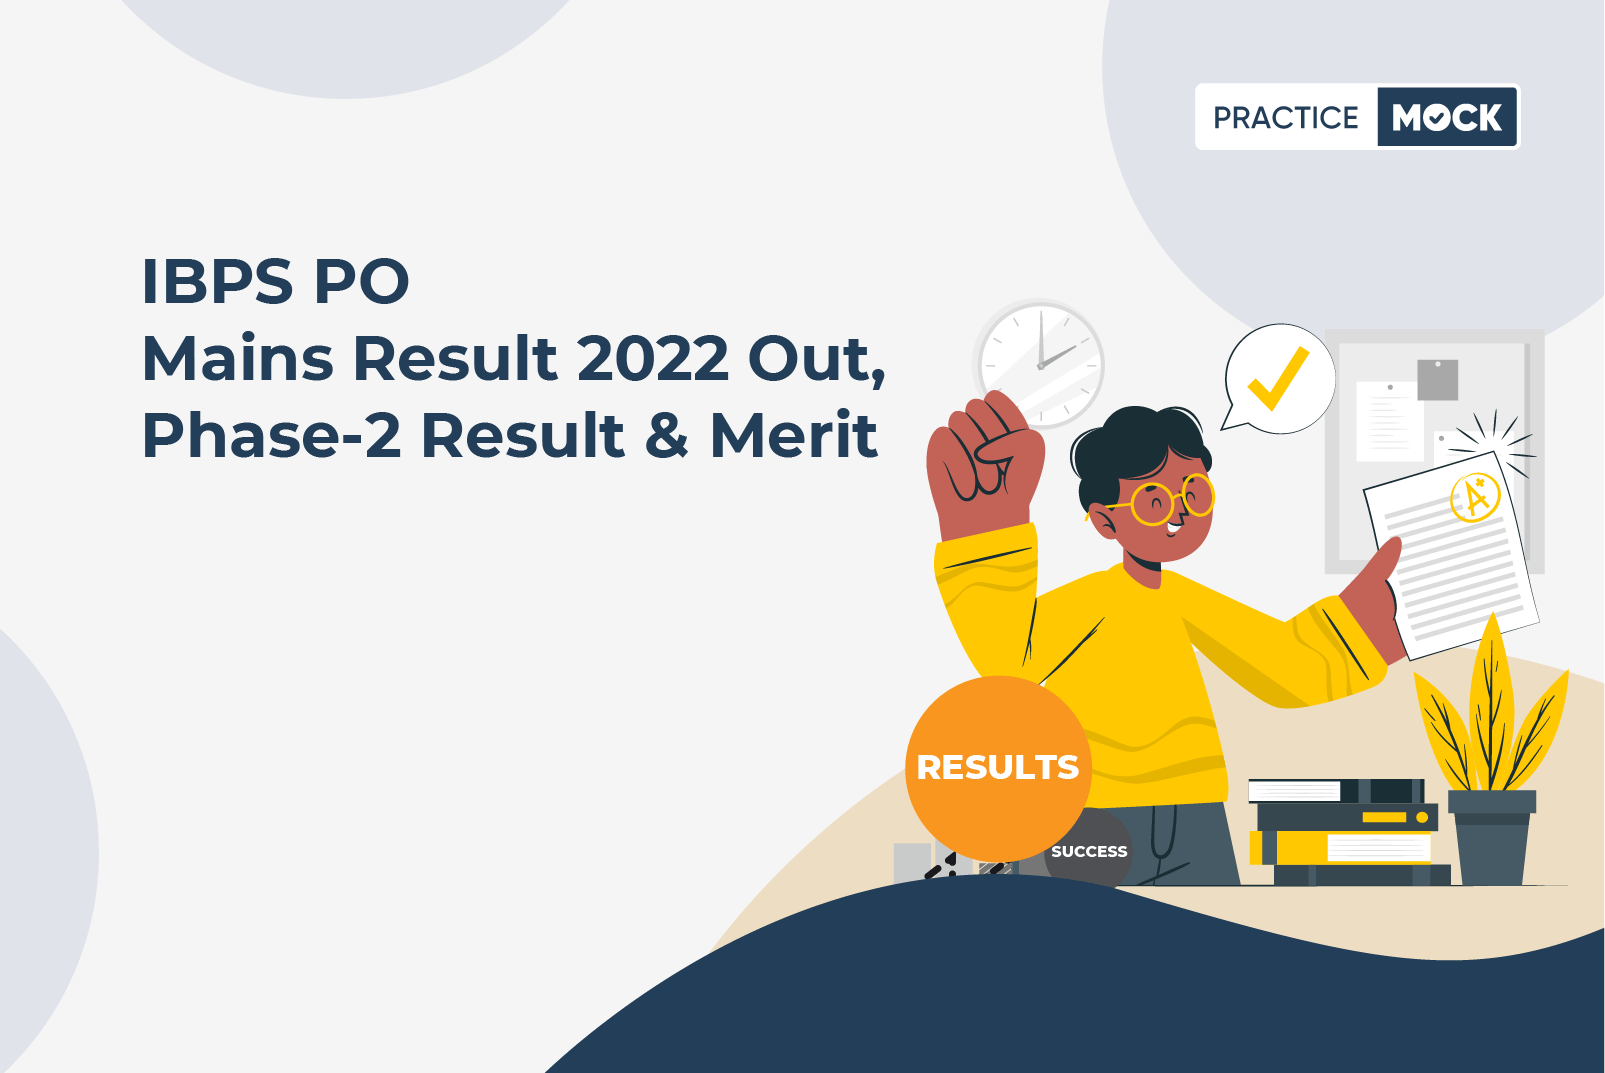 IBPS PO Mains Result 2022 Out, Phase-2 Result & Merit